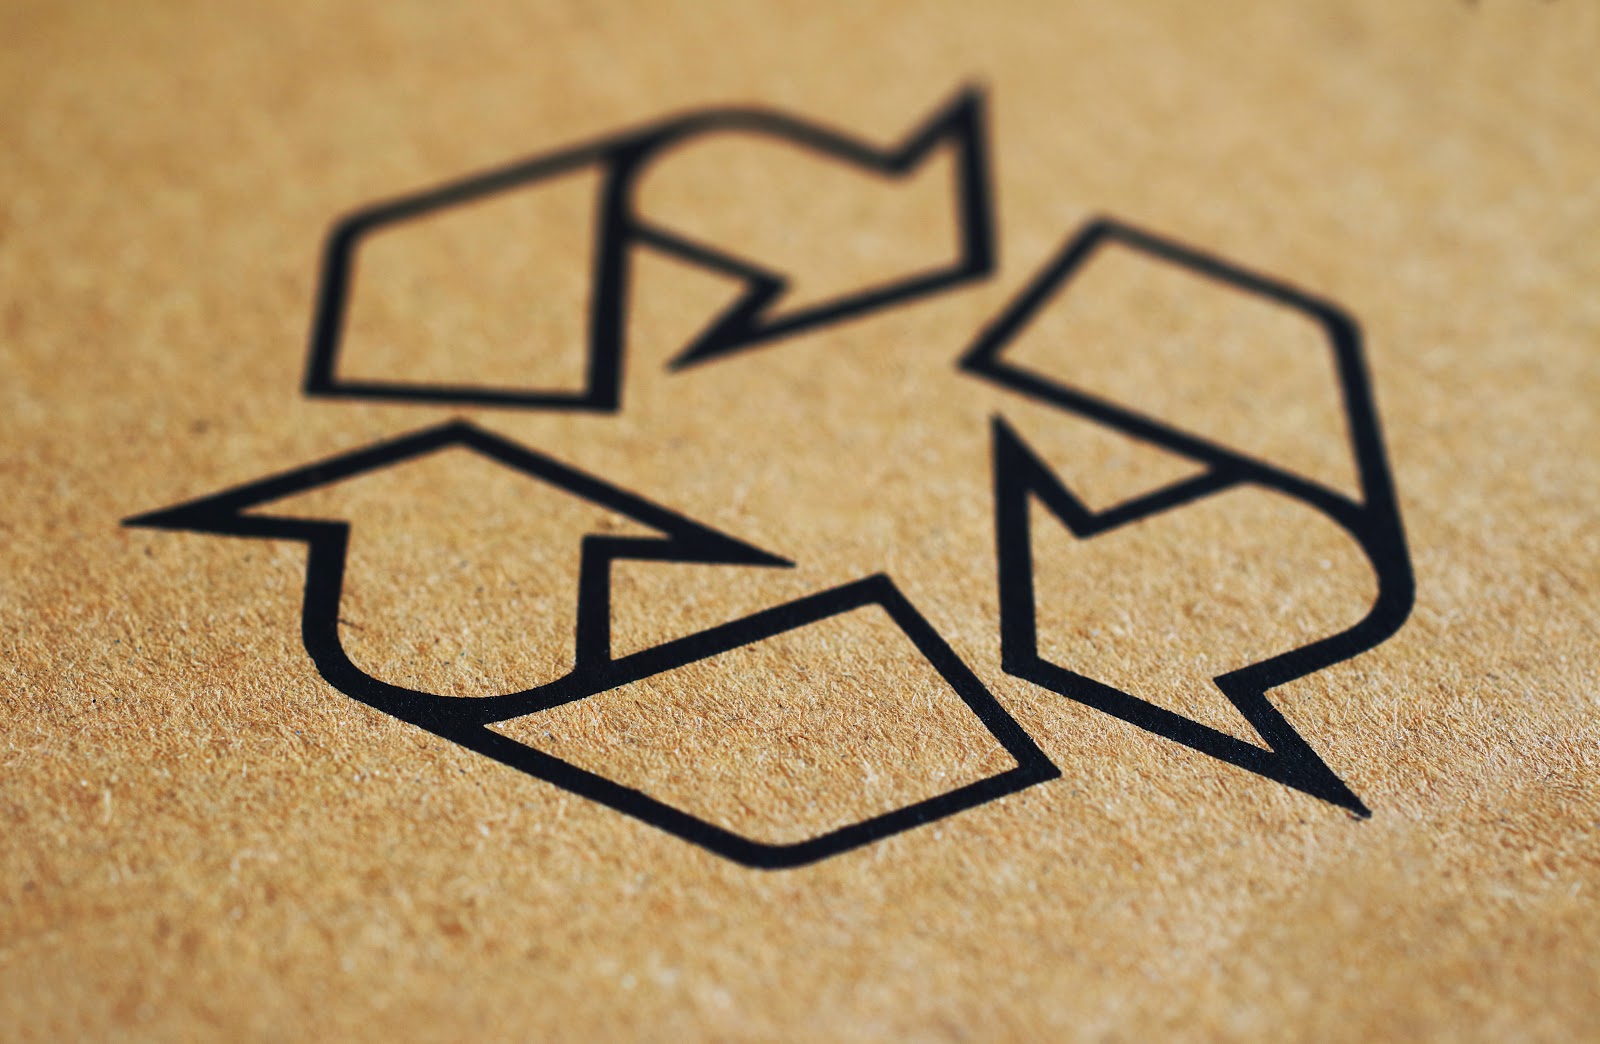 recycling logo on paper packaging.jpg